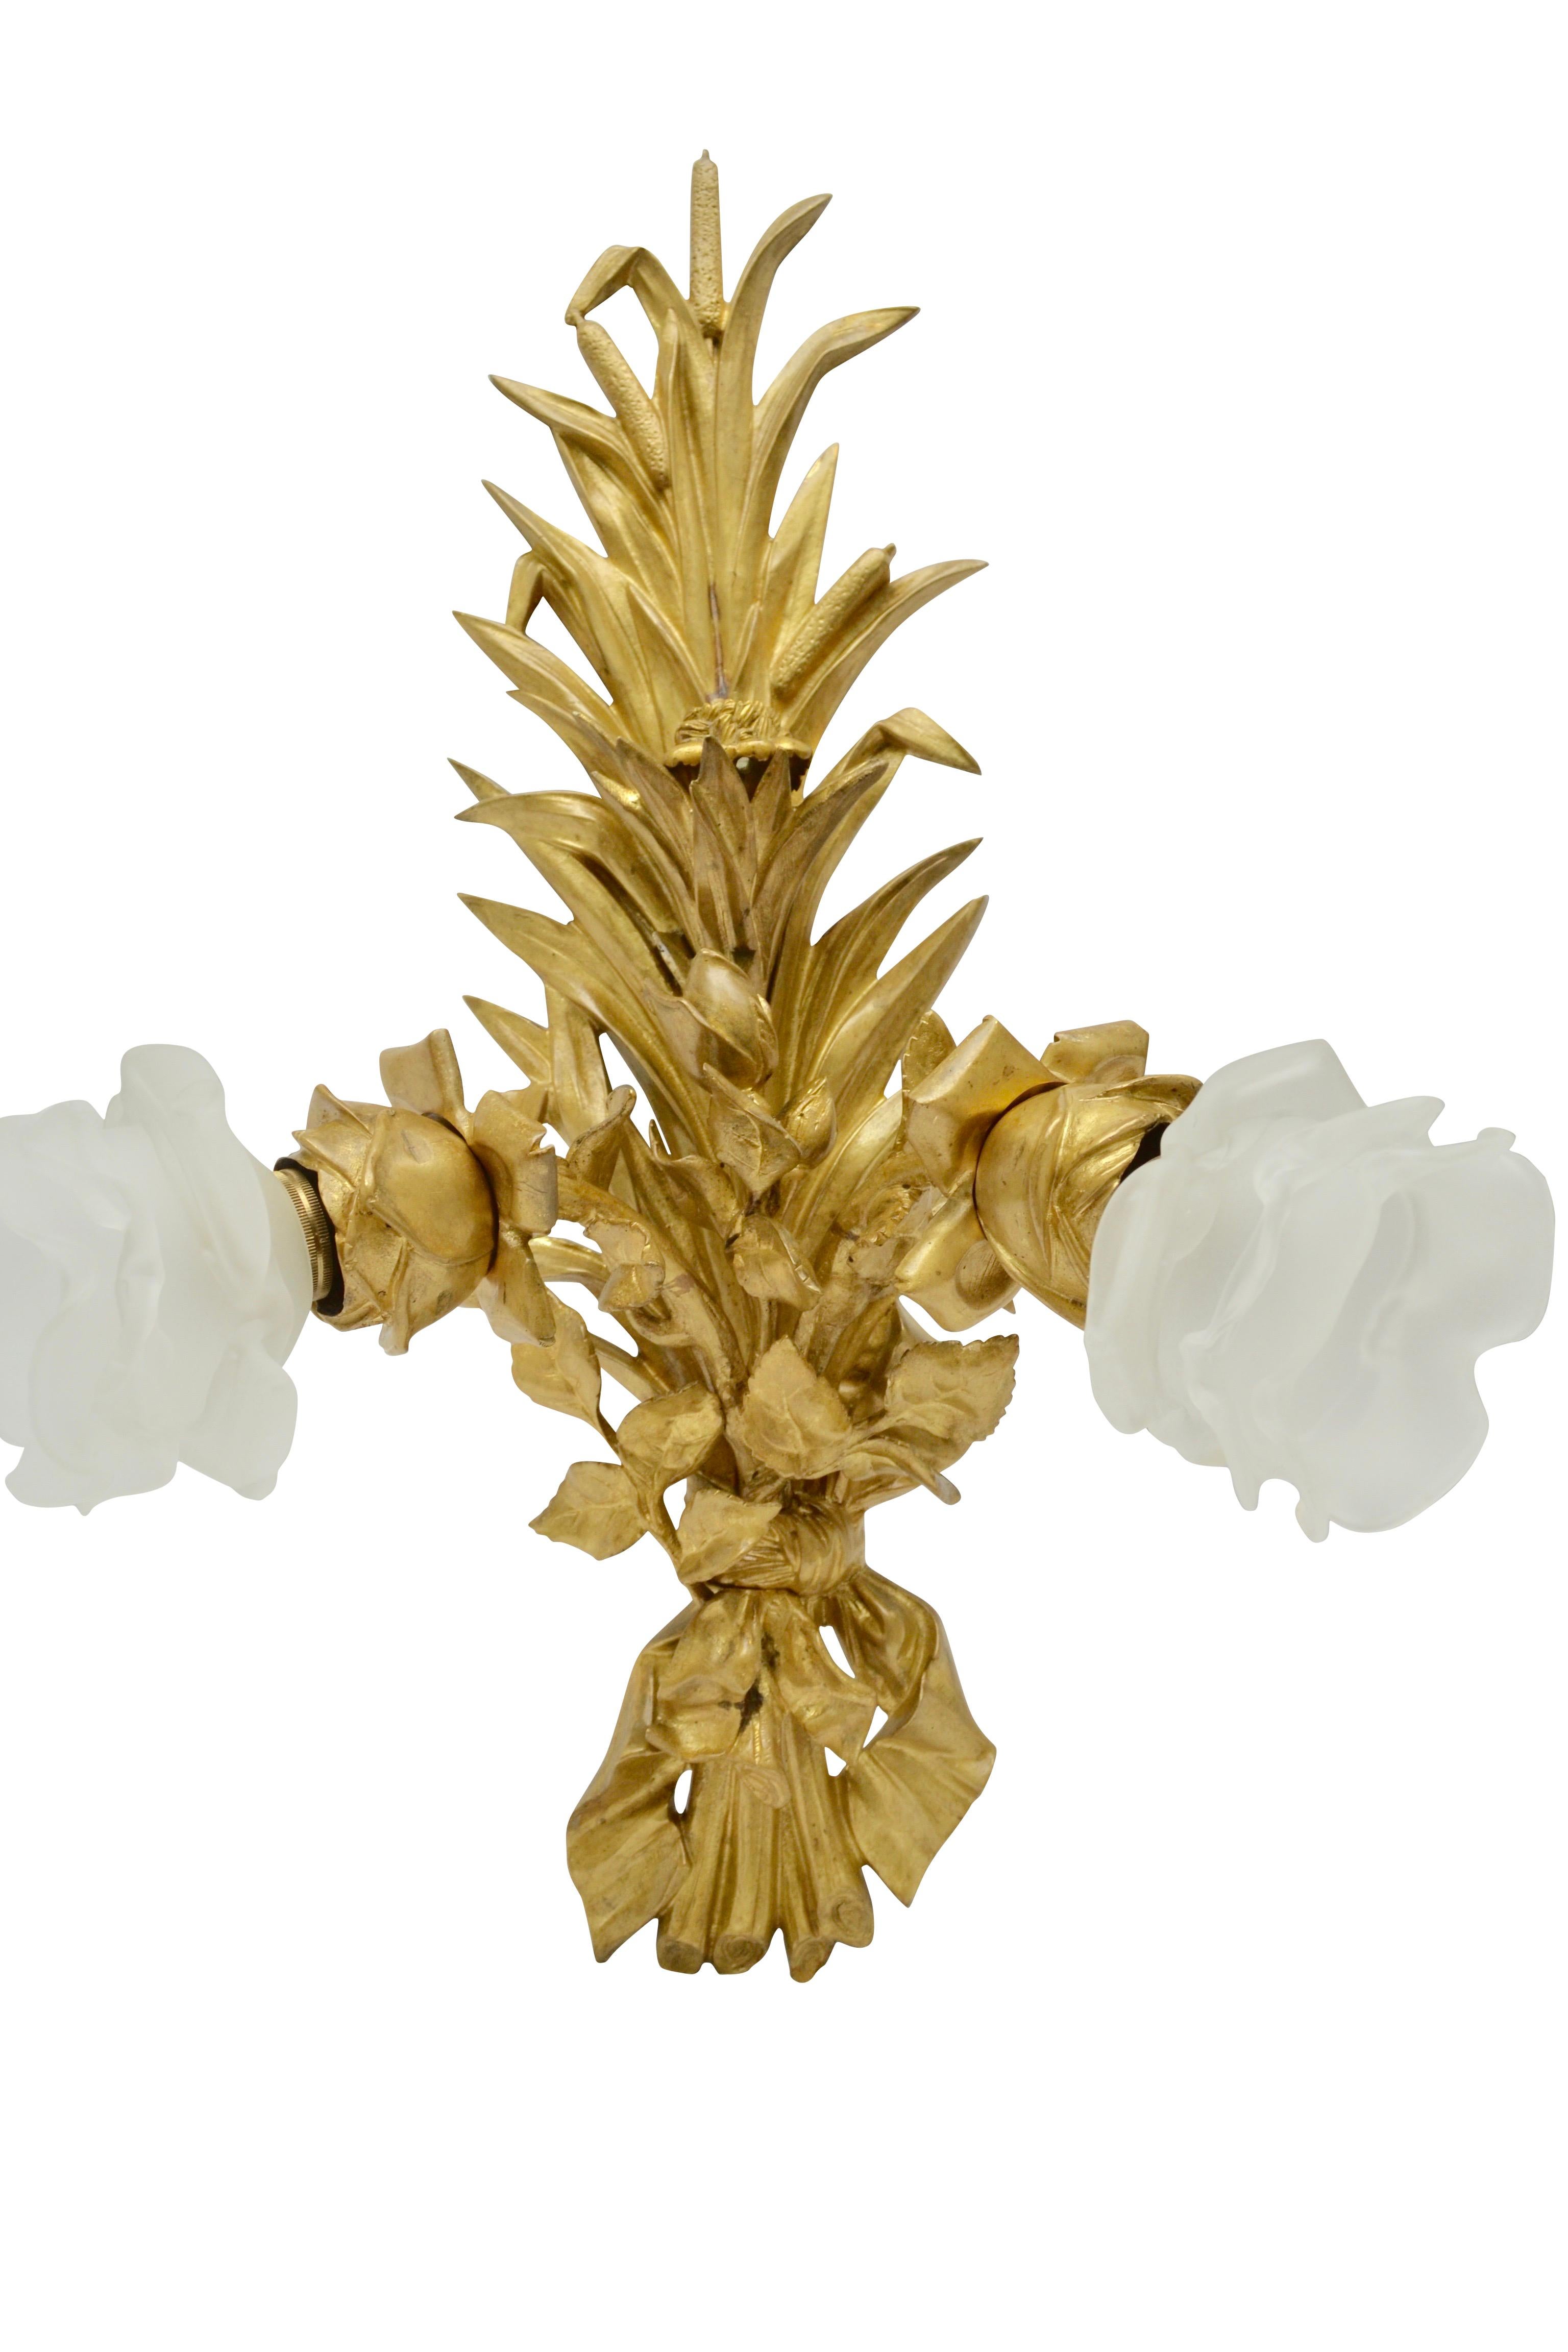 Pair of Gilt Bronze Art Nouveau Bullrush Sconces In Good Condition For Sale In Vancouver, British Columbia